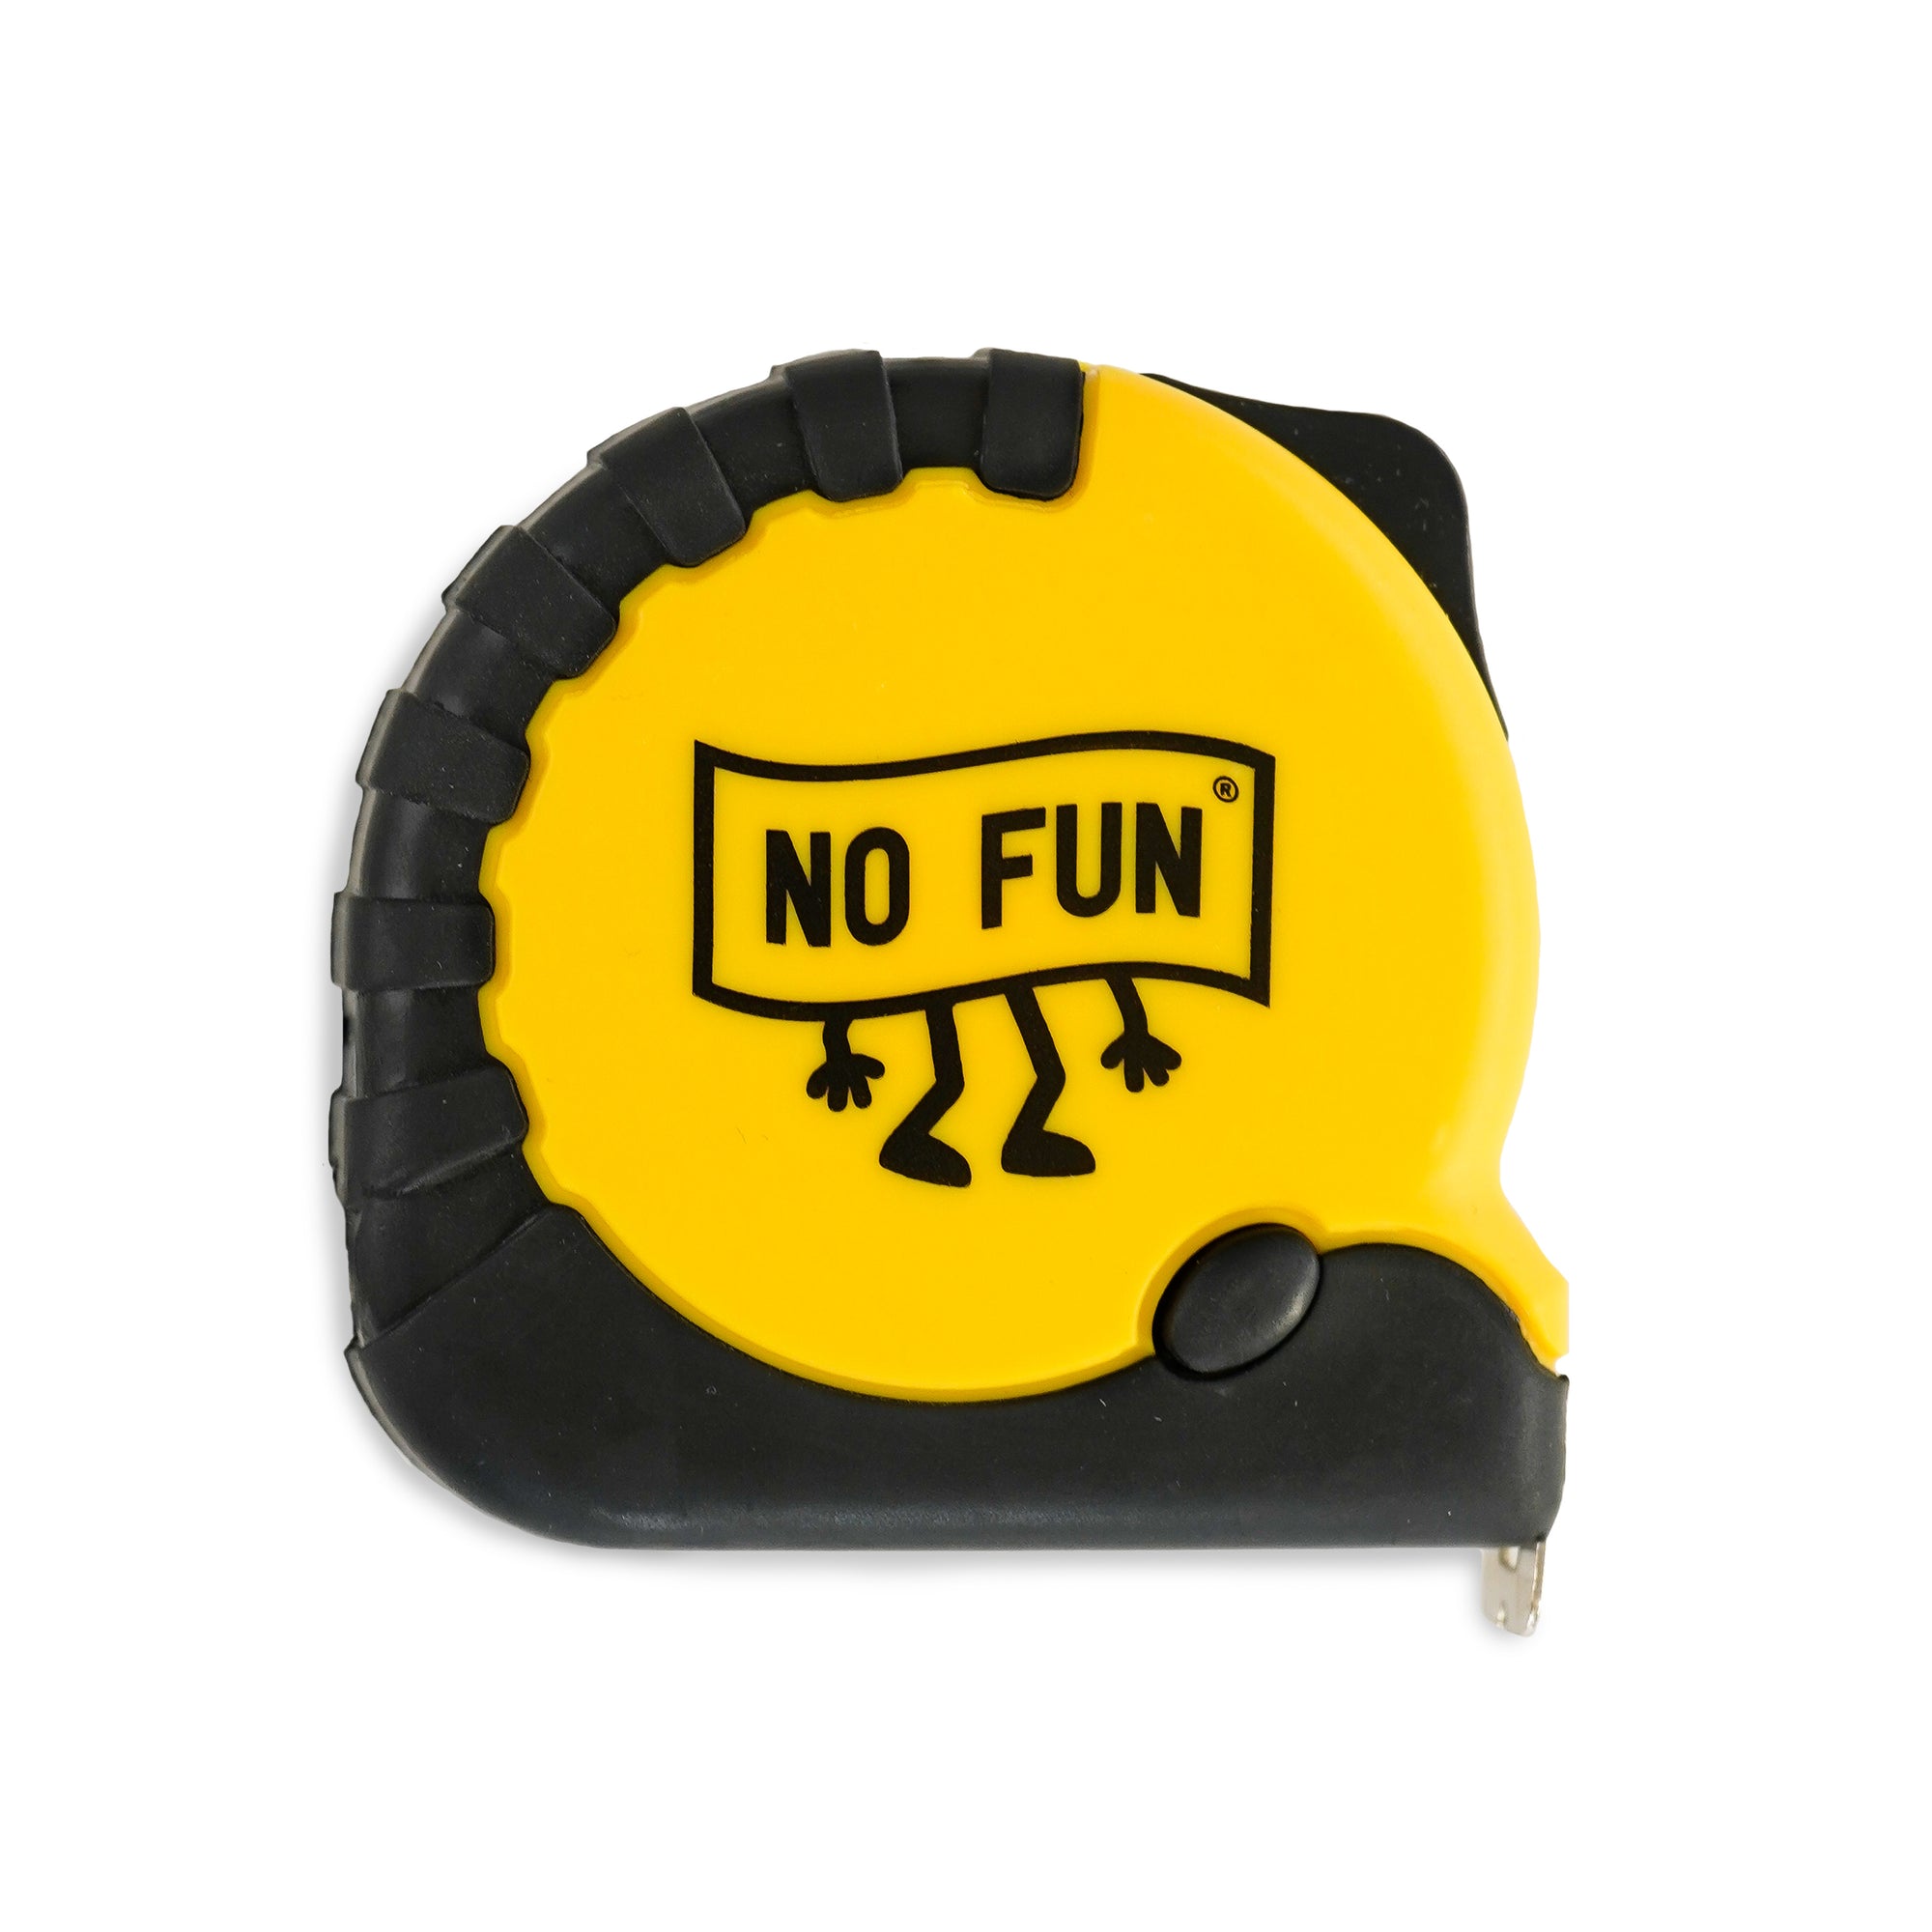 The "WORK" Tape Measure by No Fun®.  The body of the tape measure is yellow, with black accent trim.   The photo shows the product against a white background.  This side of the product features a "No Fun®" logo in the shape of a banner.  The logo also has arms and legs.  You can also see the brake on the tape measure, as well as the locking mechanism on the top right.